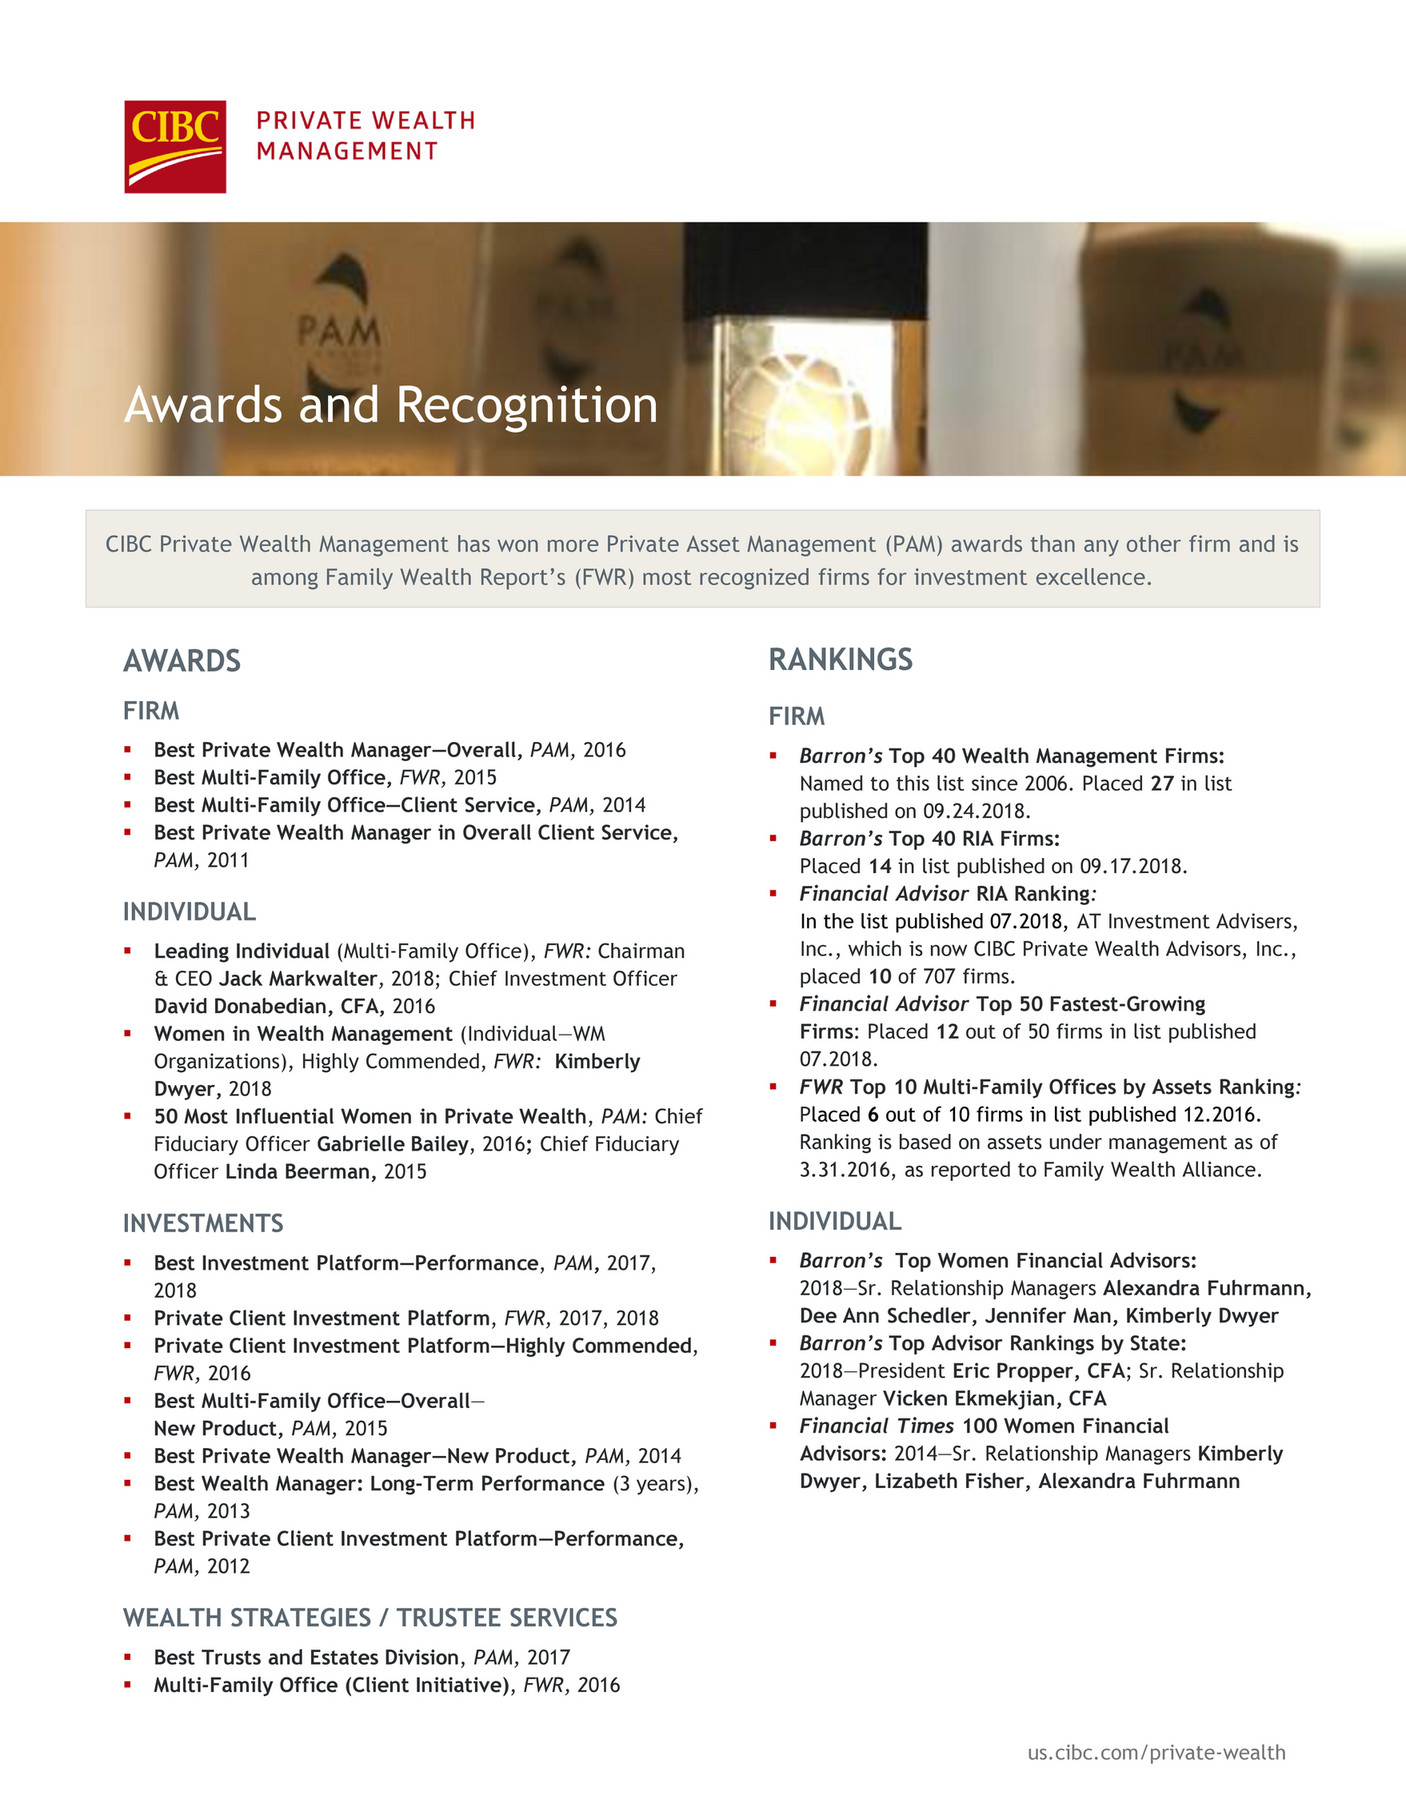 CIBC Private Wealth Management - Awards and Recognition - Page 1